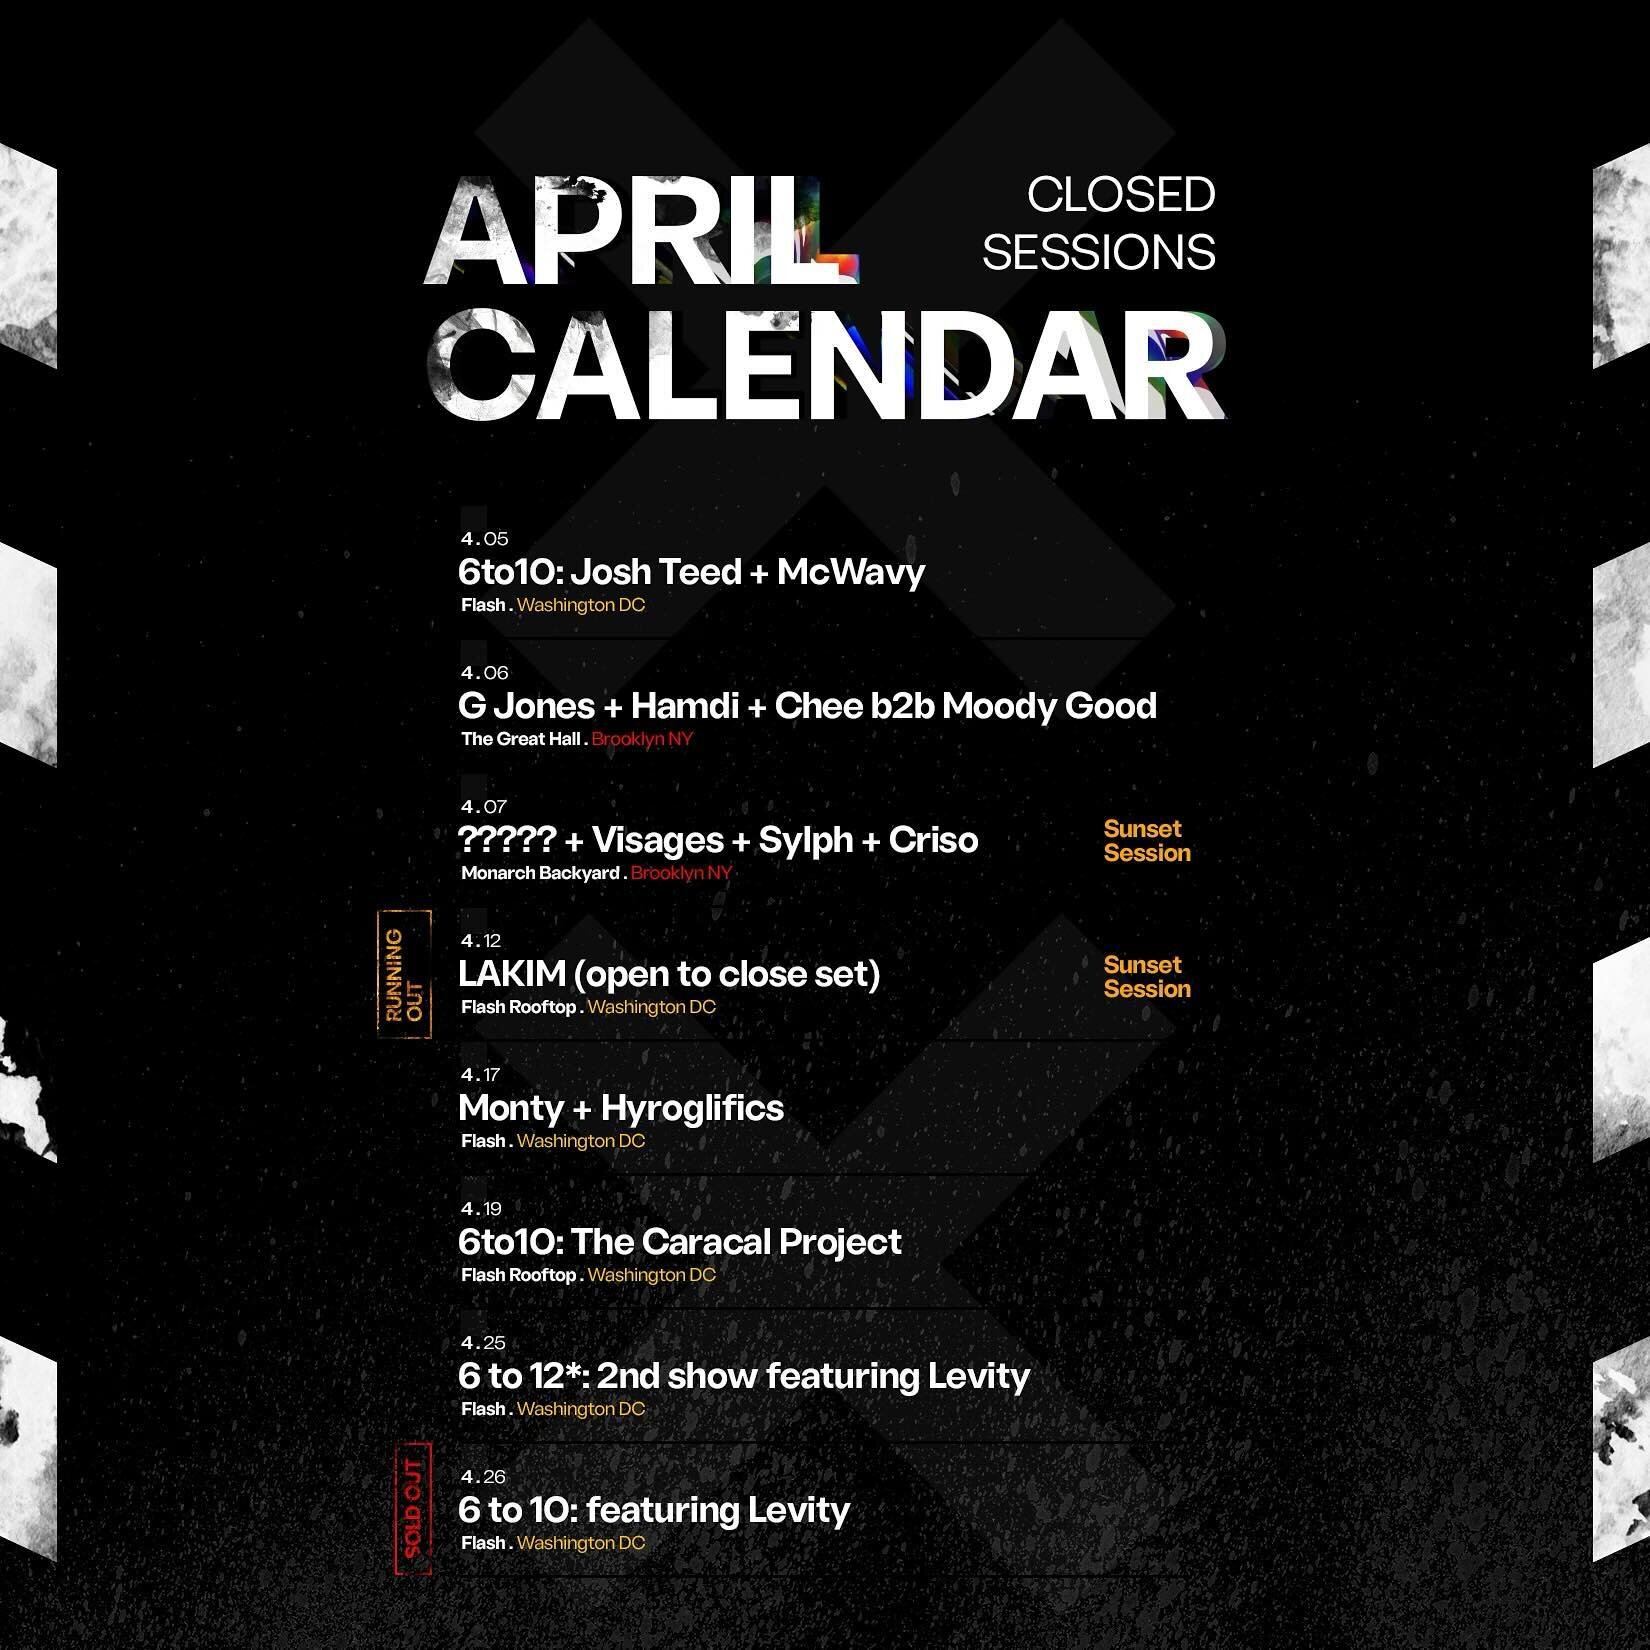 APRIL 🔜

We&rsquo;ve got some heat coming up this month in NYC &amp; DC! Grab your tickets while you still can 🔊 We&rsquo;ll see you soon

Tickets are available at closedsessions.live